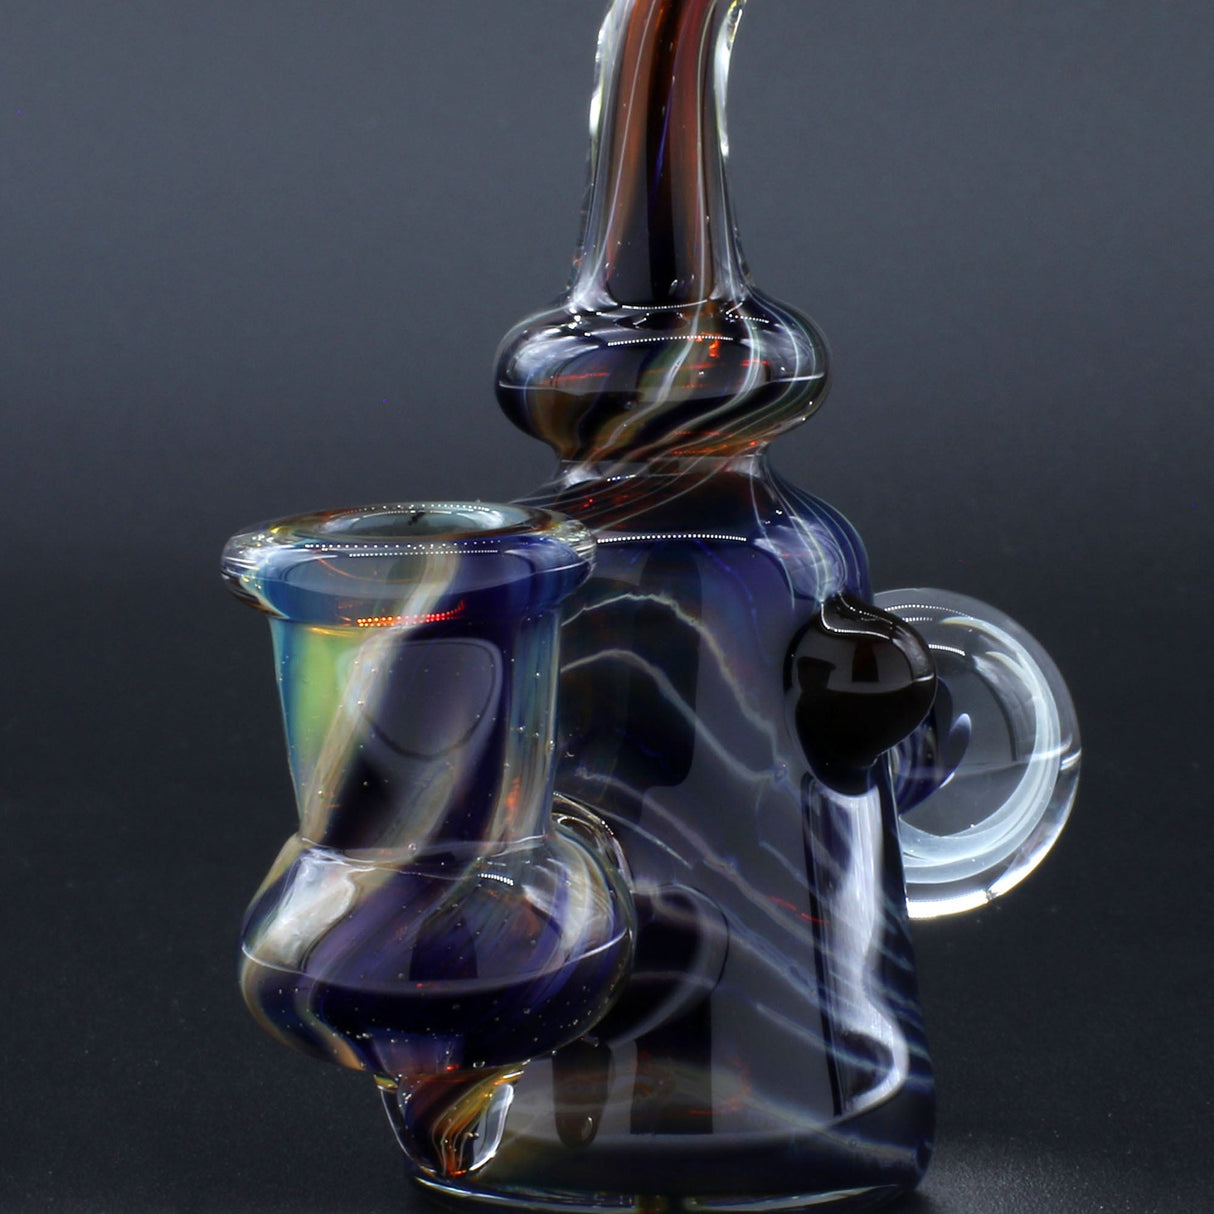 Clayball Glass "Black Moon" Heady Sherlock Dab Rig with intricate design, side view on black background